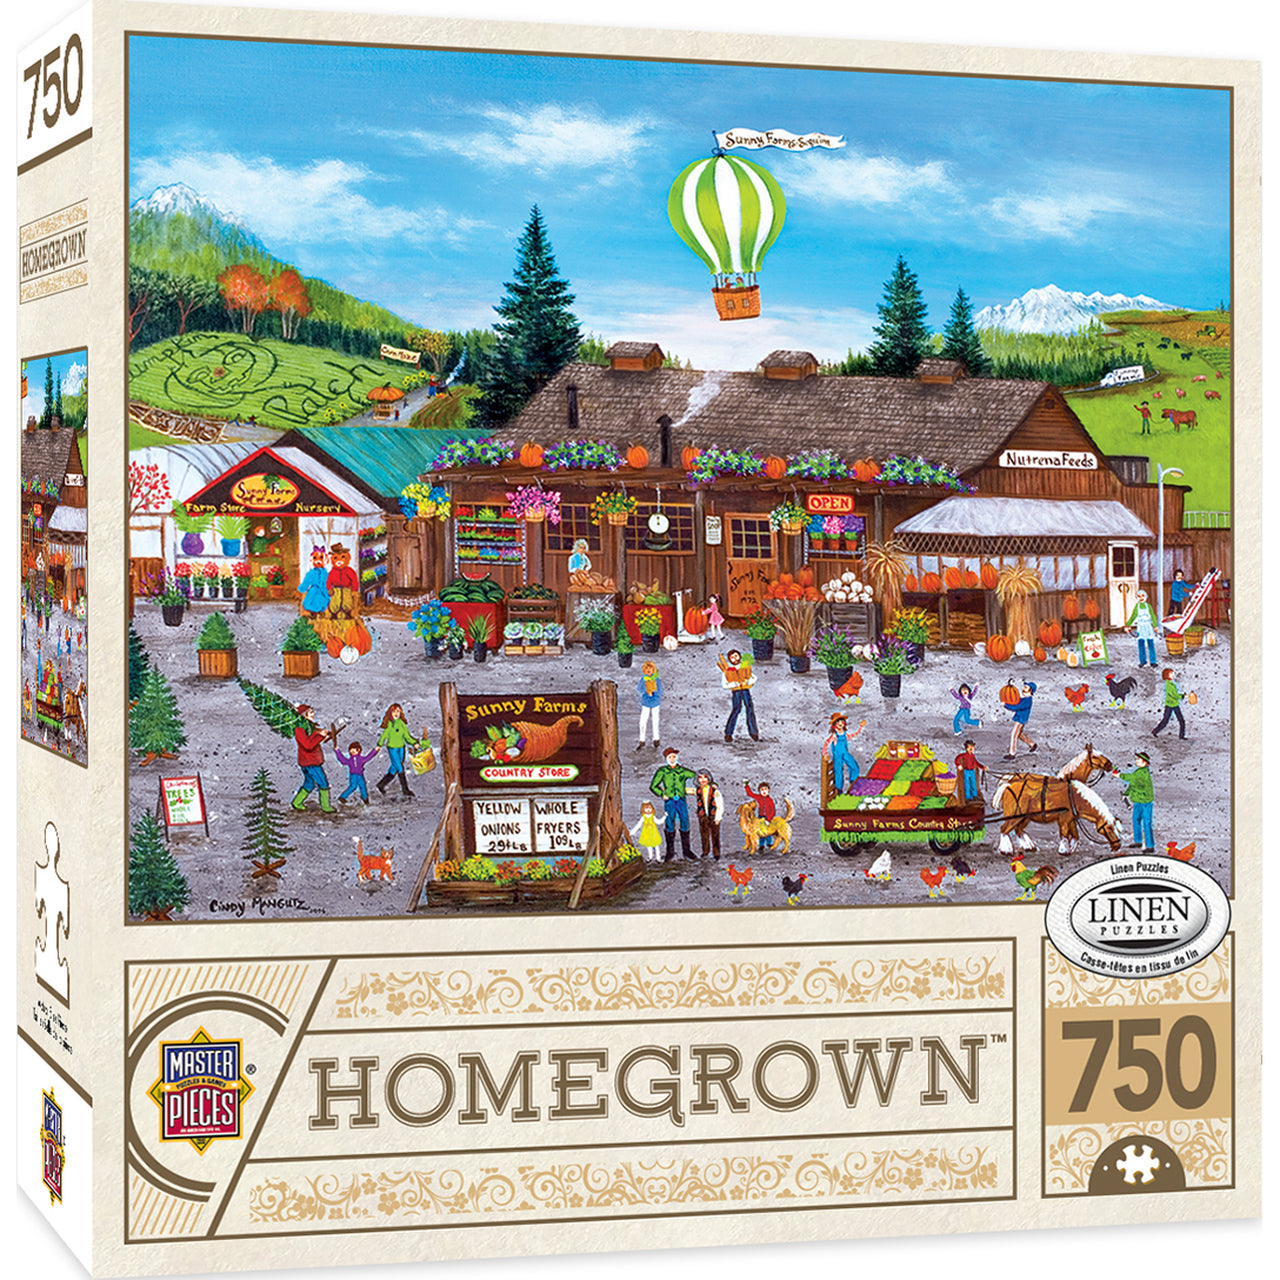 Homegrown Sunny Farms - 750 Piece Linen Jigsaw Puzzle by Masterpieces